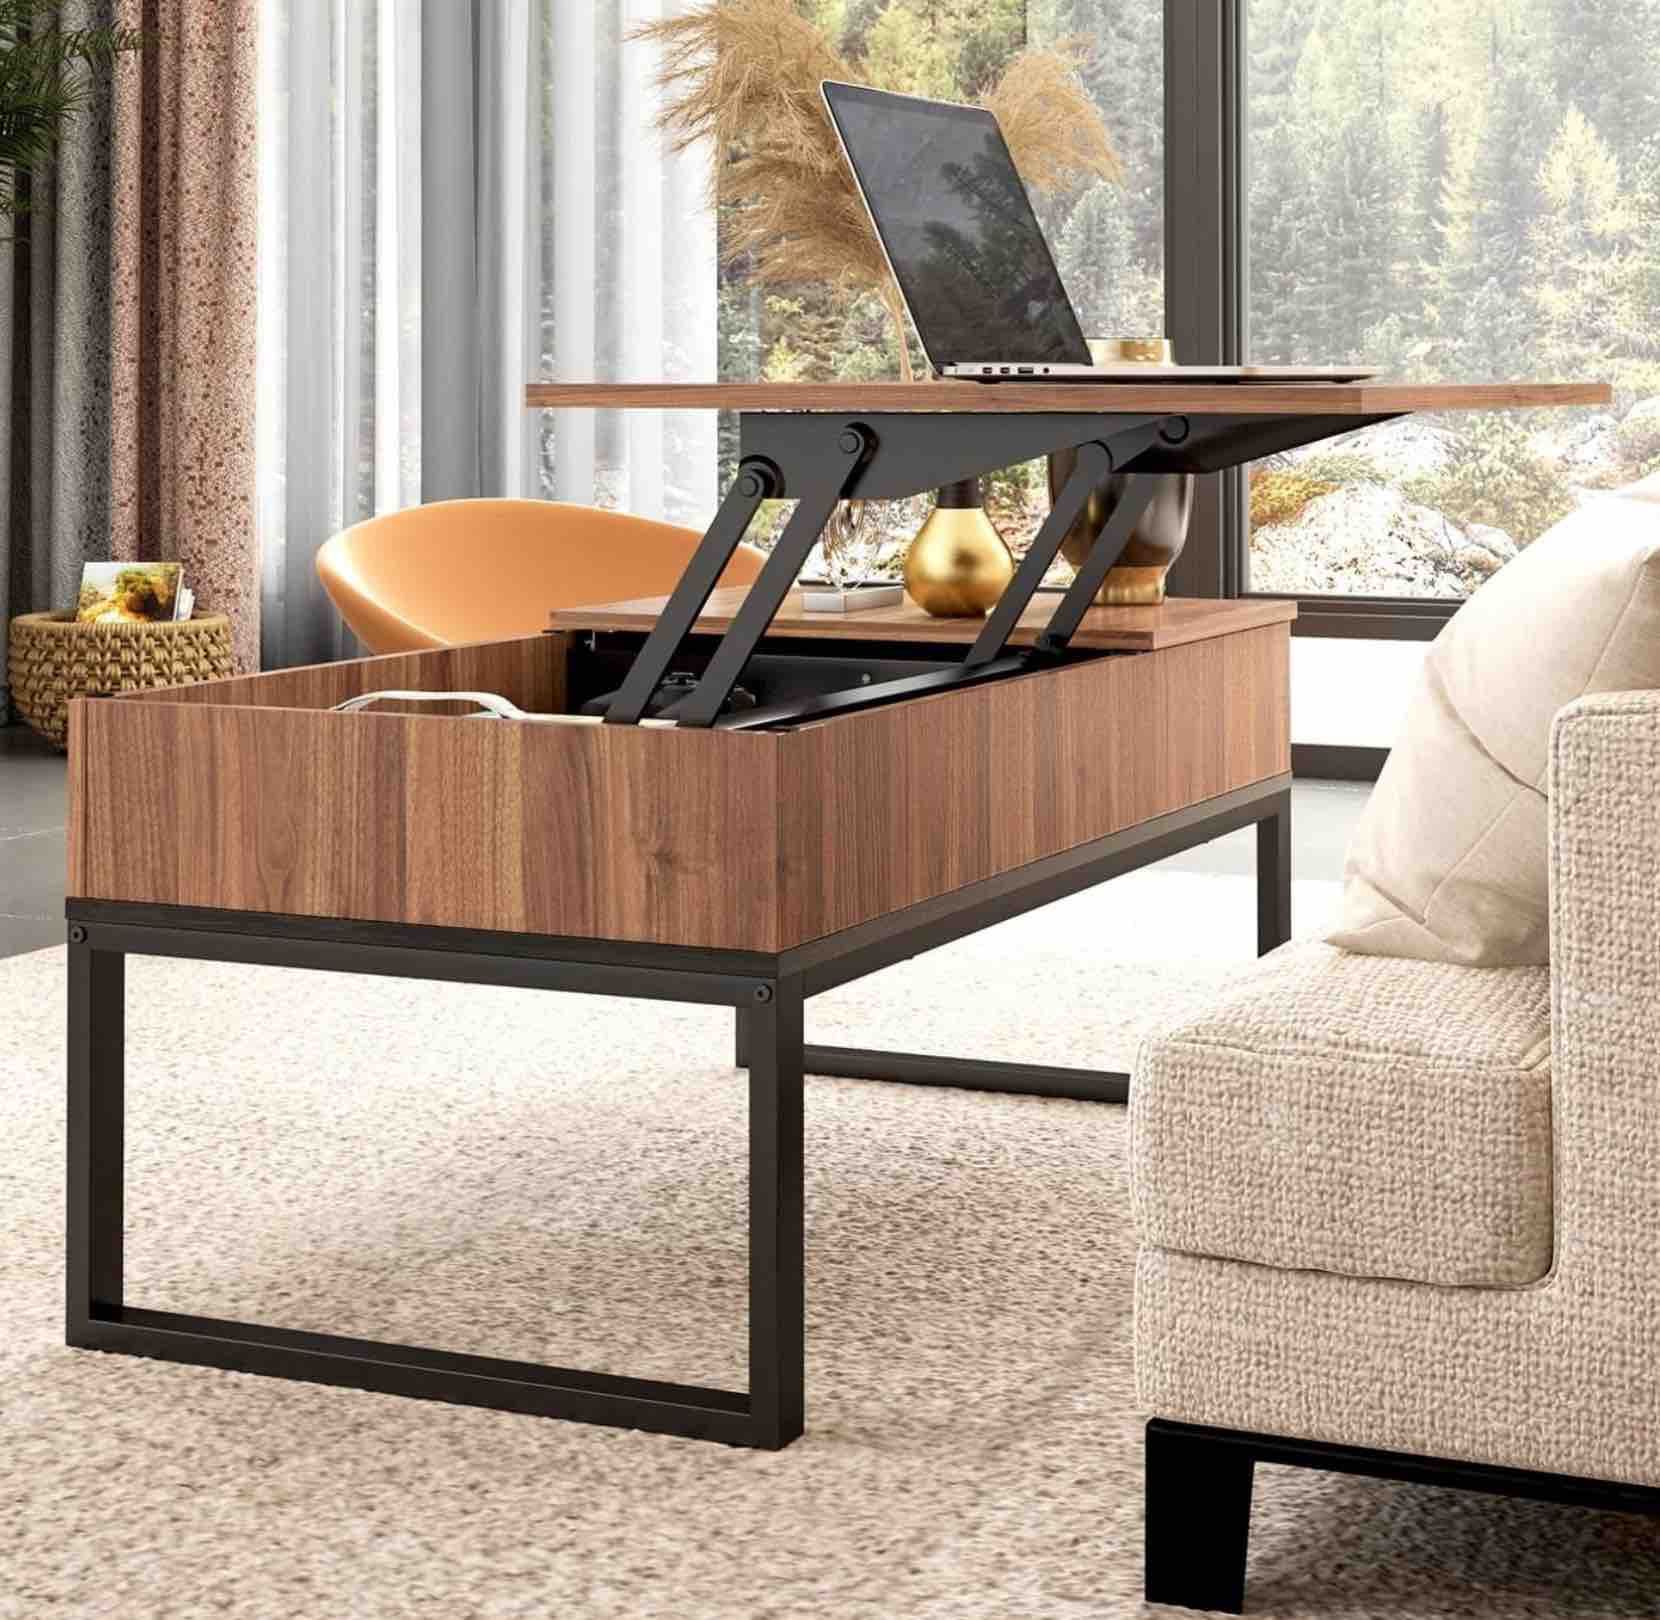 Wlive Pop Up Coffee Table With Hidden Storage Compartments — Tools And Toys Within Coffee Tables With Hidden Compartments (View 15 of 15)